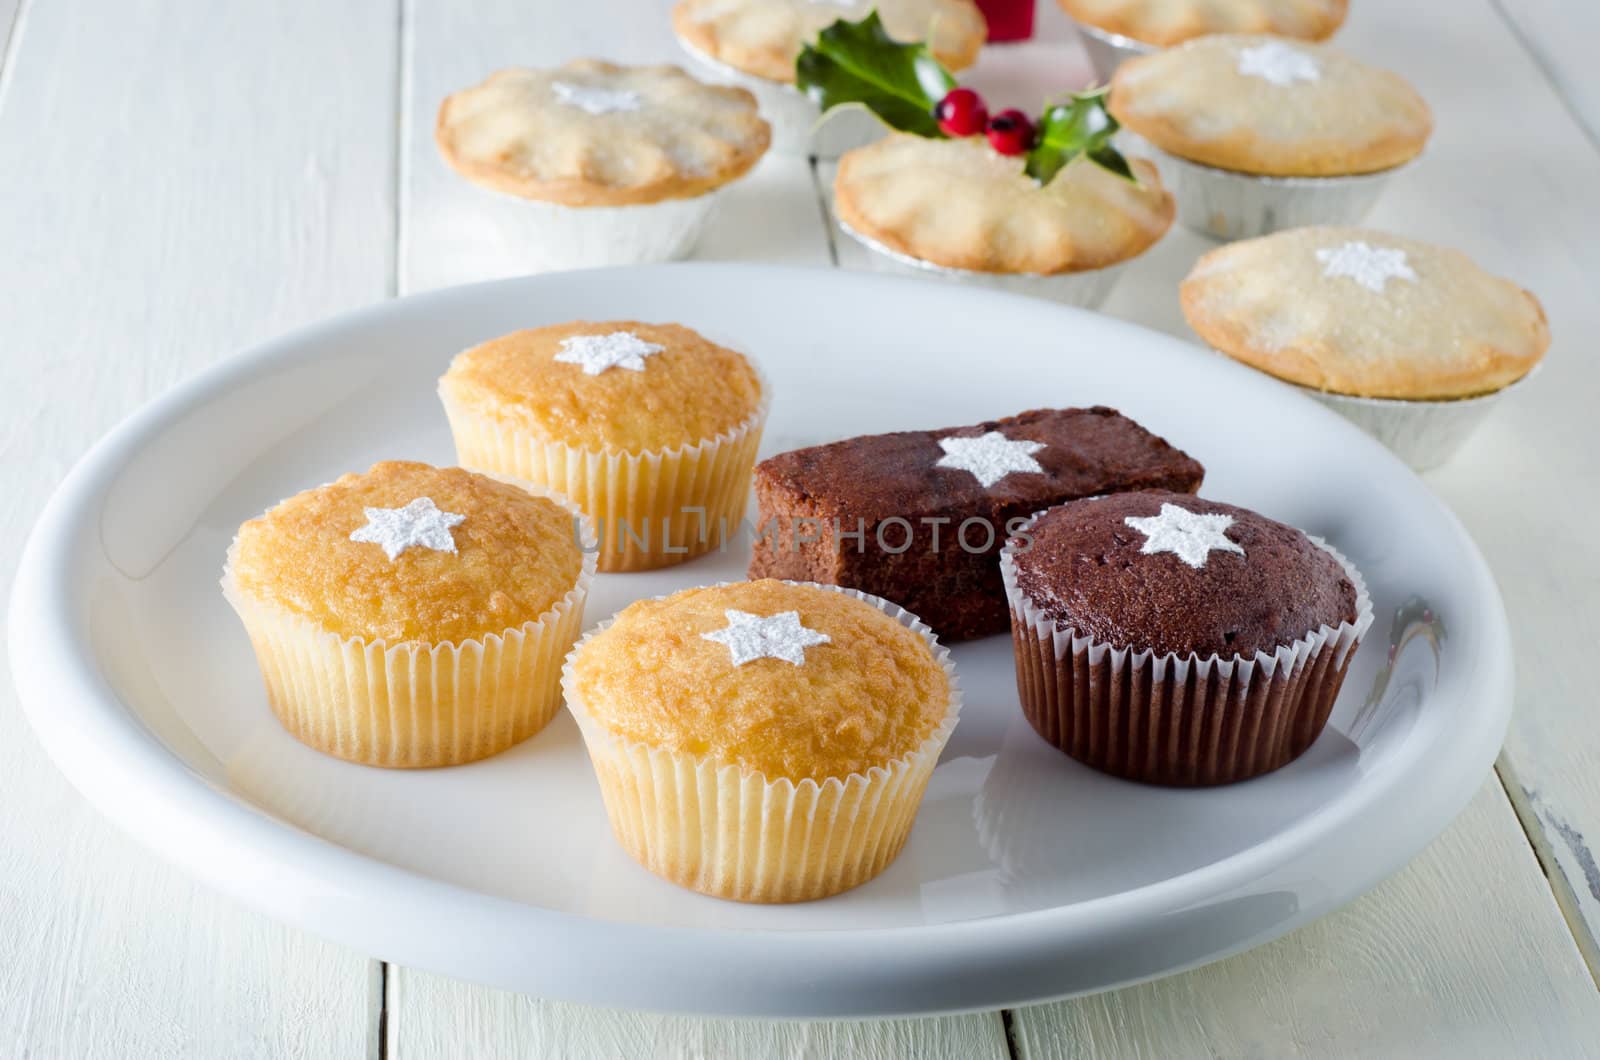 Christmas cakes on a plate decorated with stars from sifted icing sugar, with mince pies and holly in soft focus background. Laid out on a white, planked farmhouse table.